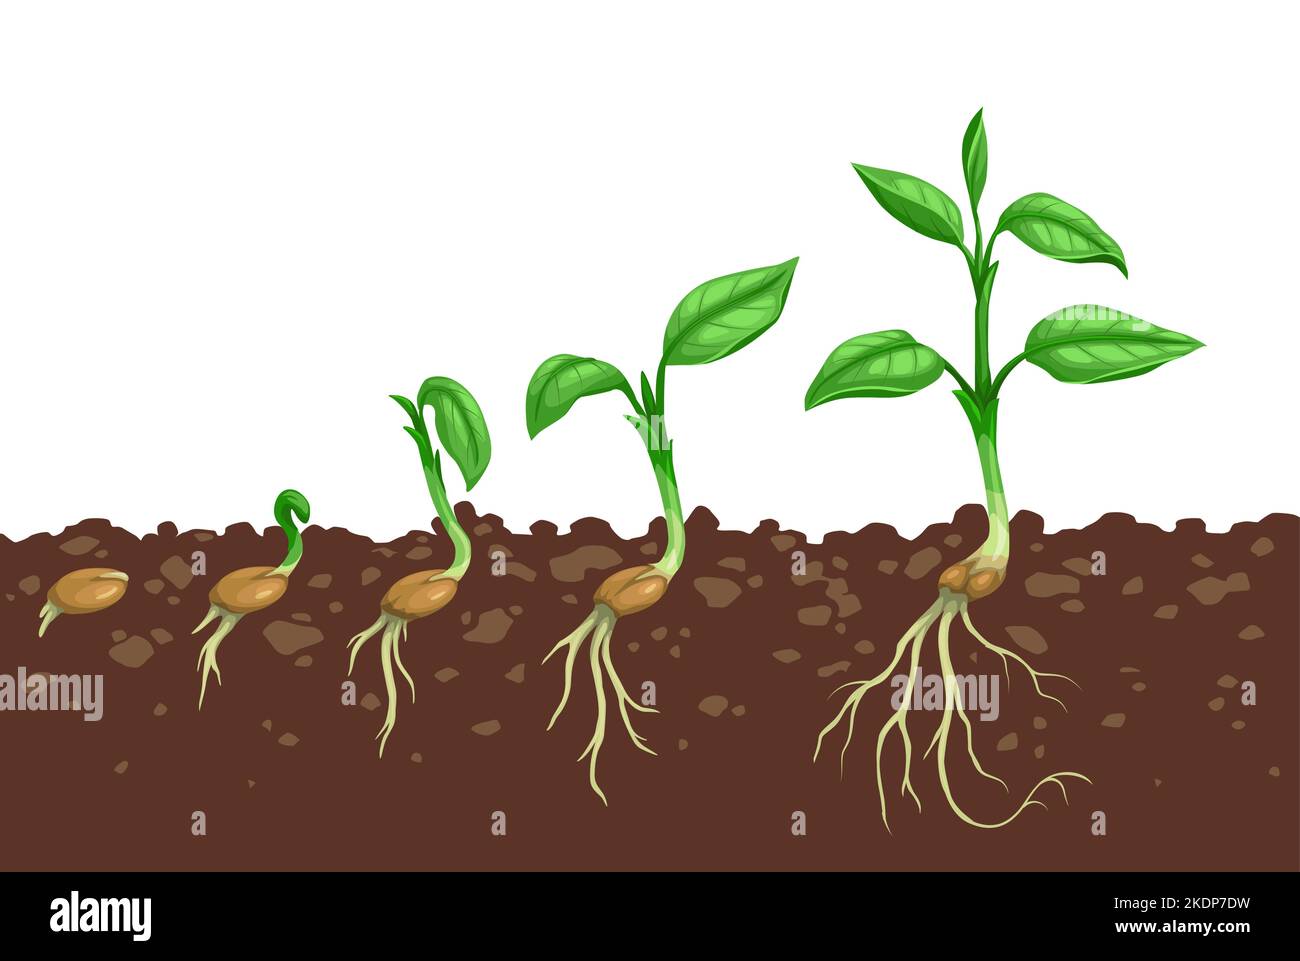 Plant growth steps. Seed germination in soil. Agriculture seedling evolving stages or sapling development steps, sprout grow process with seed in soil, seedling roots and plant leaves on stem Stock Vector